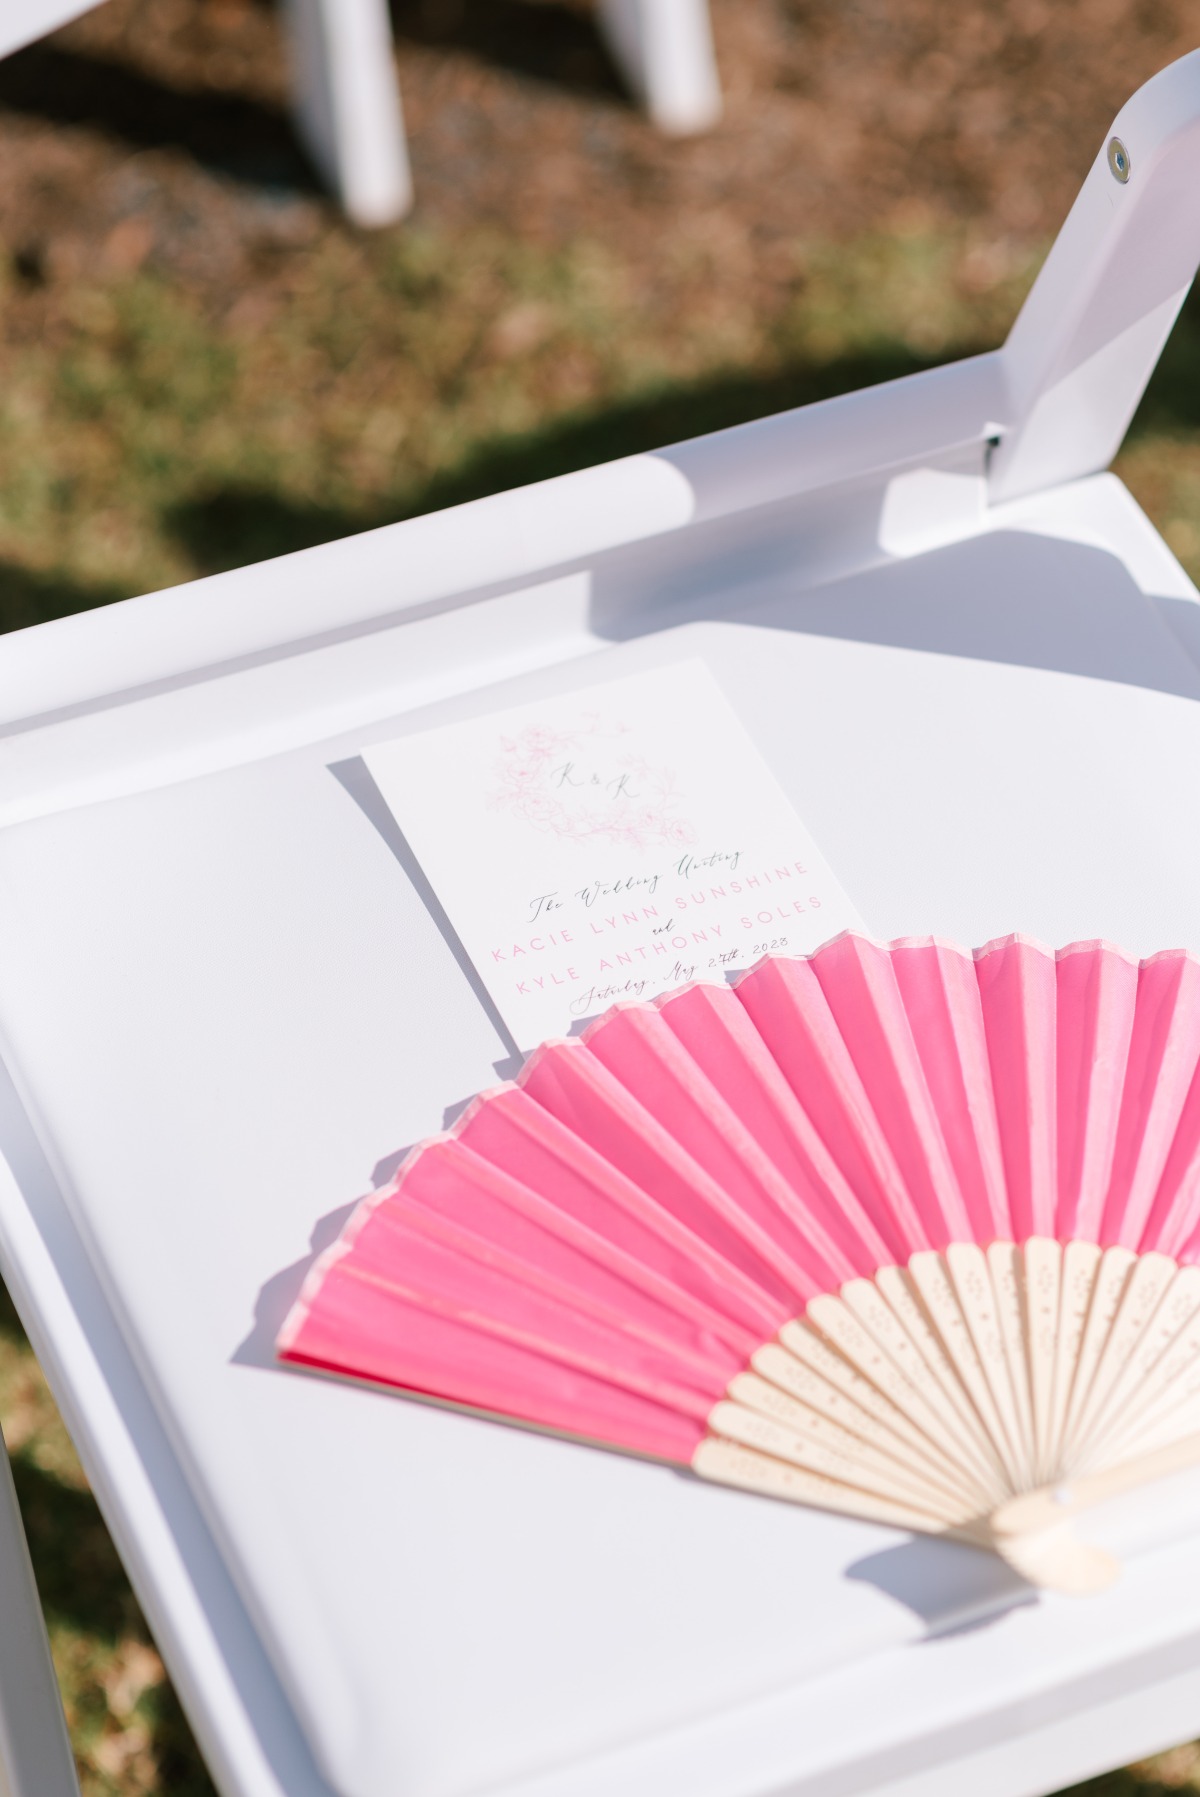 Hot pink fan and white floral program for ceremony seat